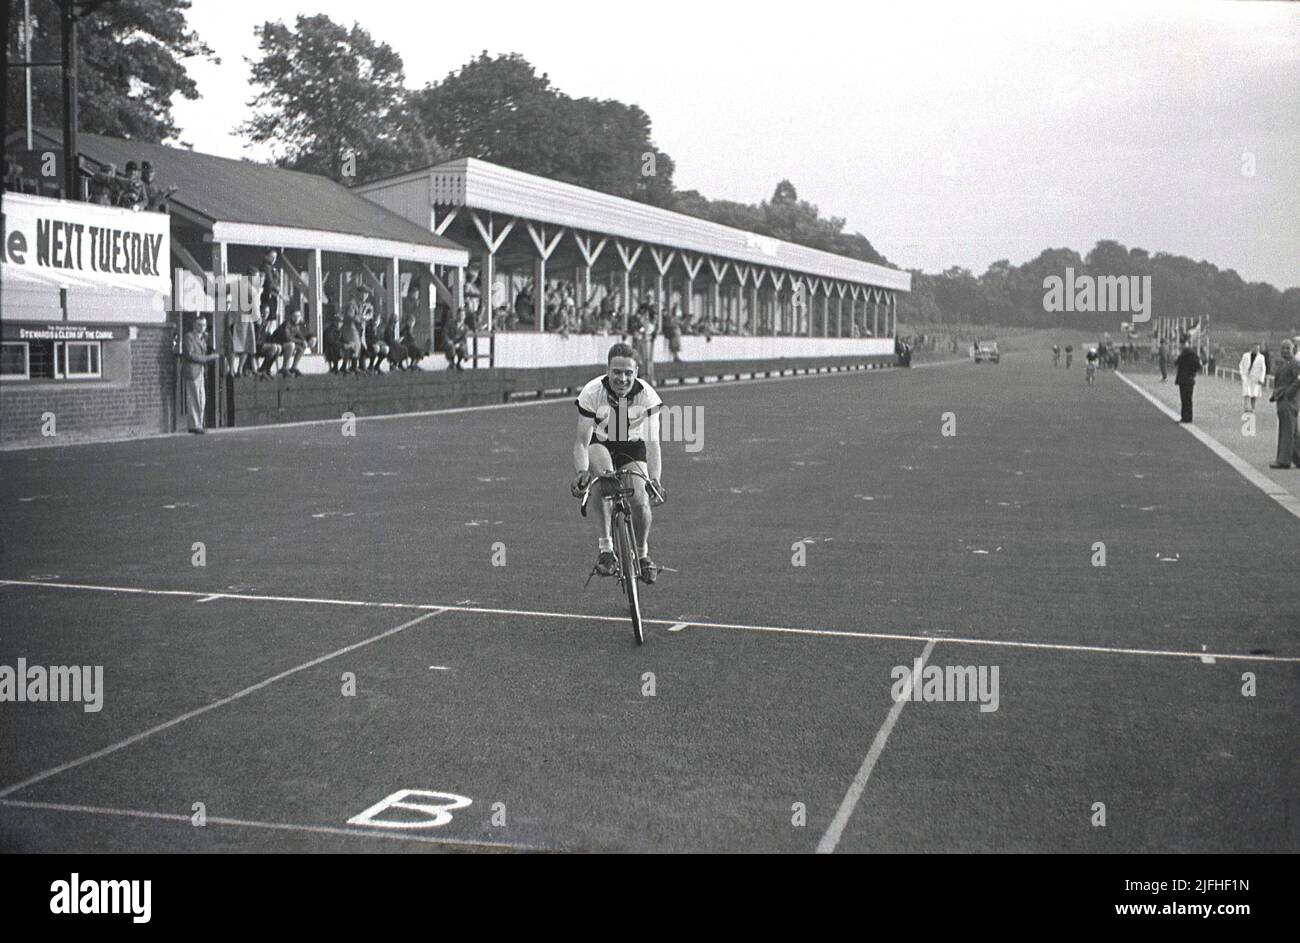 1937, historical, a racing cyclist crossing the line for a victory on the  motoring race circuit at Crystal Palace Park, South London, England, UK. The park was London’s first home of cycle racing in 1869, with its first dedicated cycle track opening in 1880. The motor racing circuit opened in the park in 1927, with motor cycle racing the first event. In 1936 the one mile circuit was extended to two miles and tarmac laid over its entire length and in 1937 the first London Grand Prix took place. Seen in the picture is the main grandstand of the motor racing circuit. Stock Photo